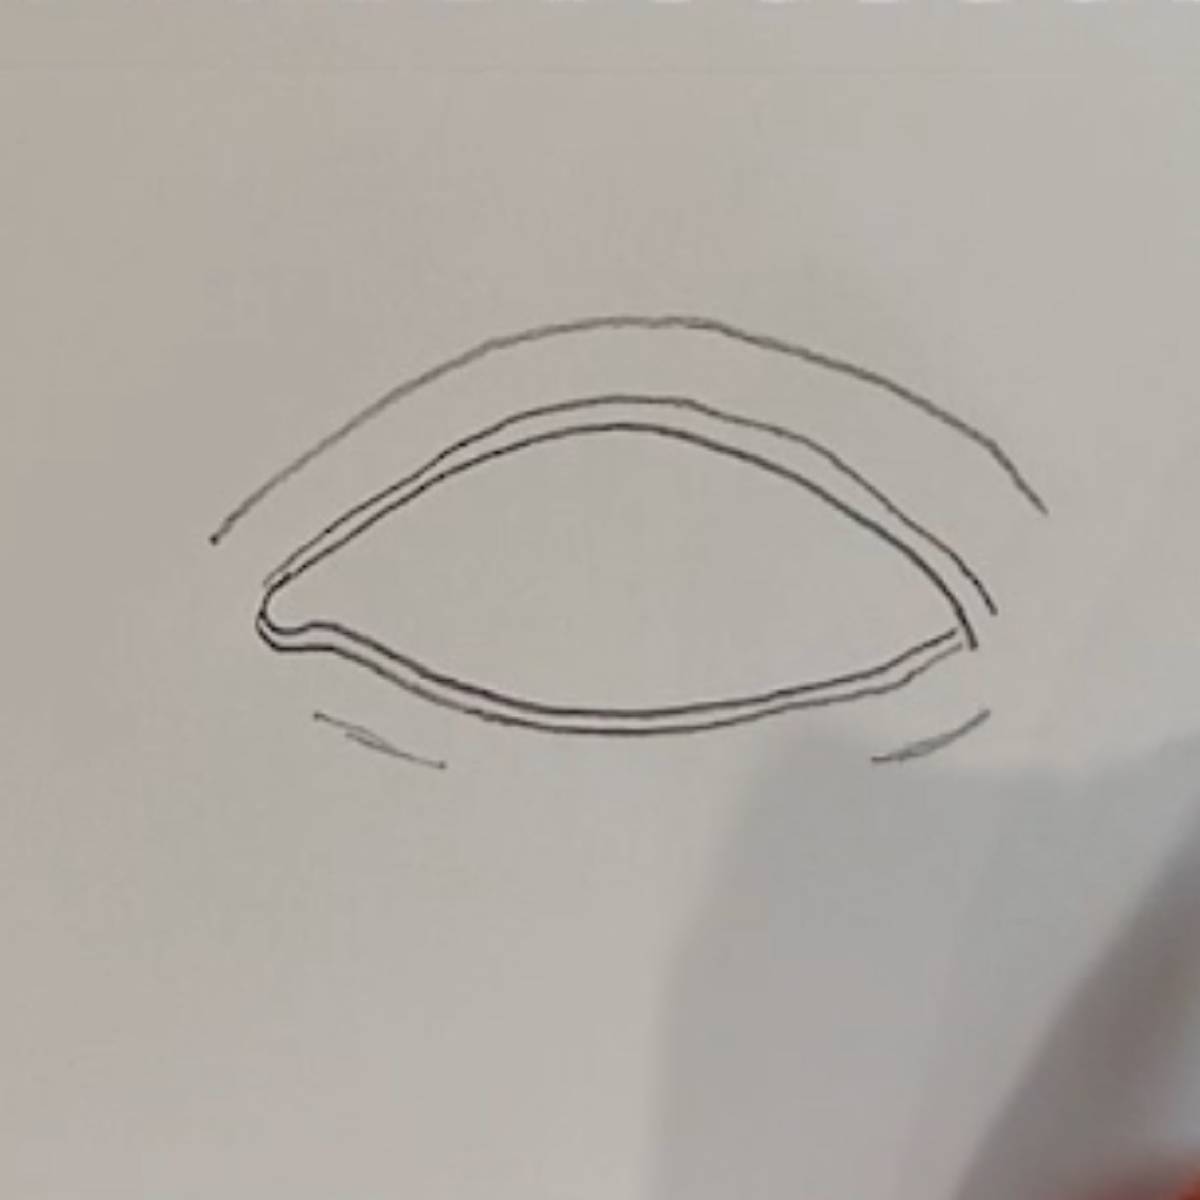 Sketch the basic shape of the eye, add lines for the edges of the lids and lines above and below.